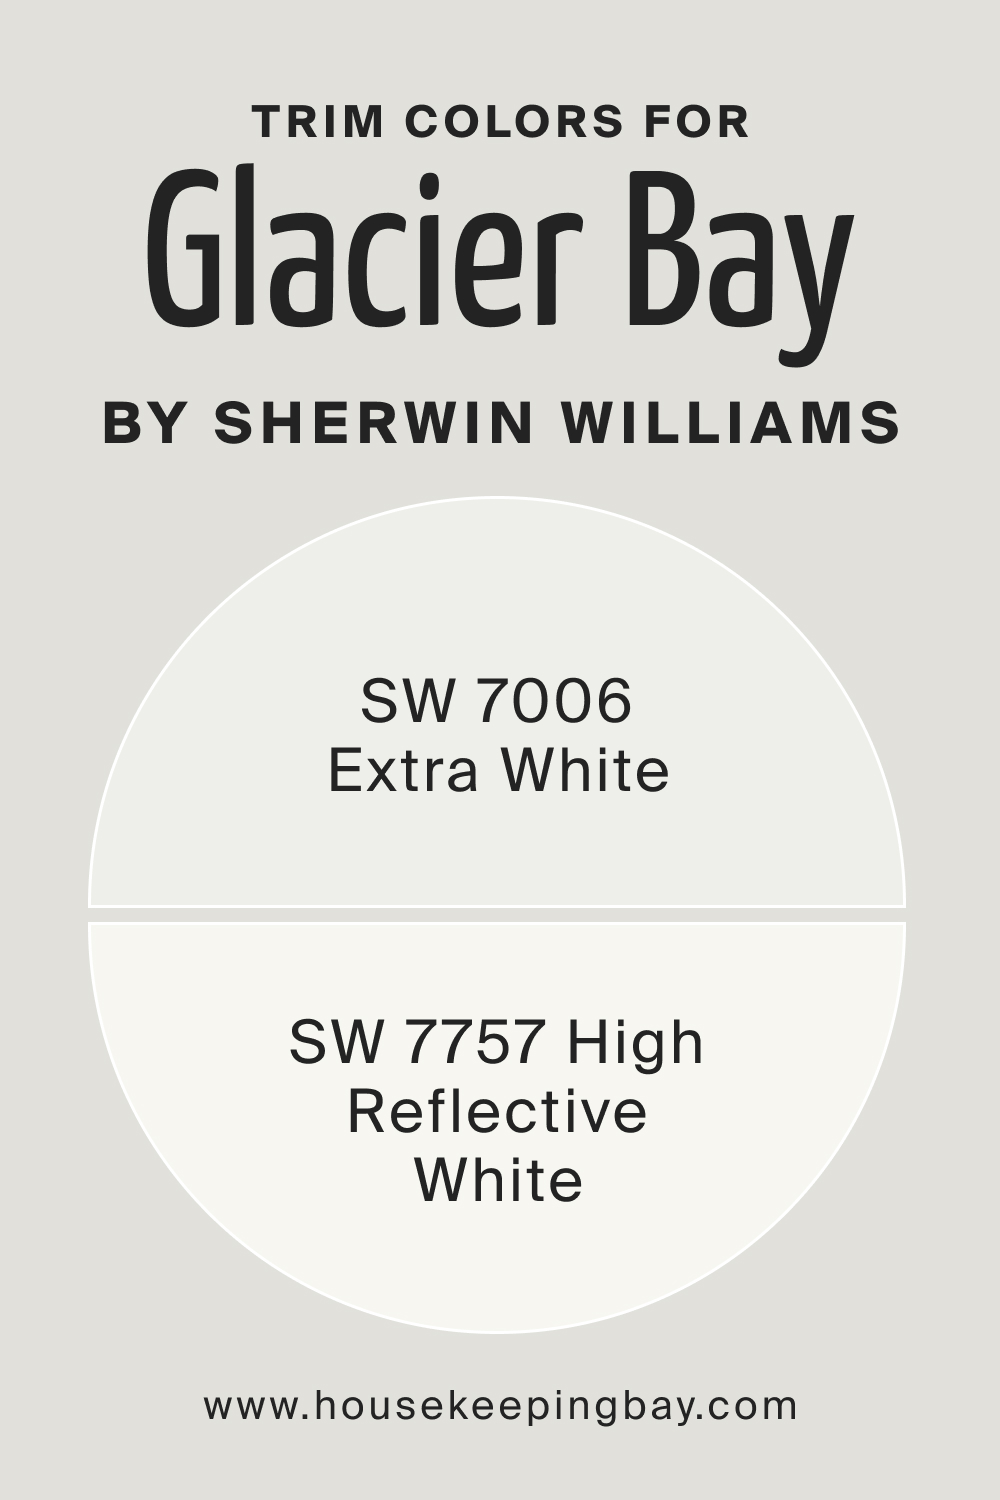 Trim Colors of SW 9626 Glacier Bay by Sherwin Williams